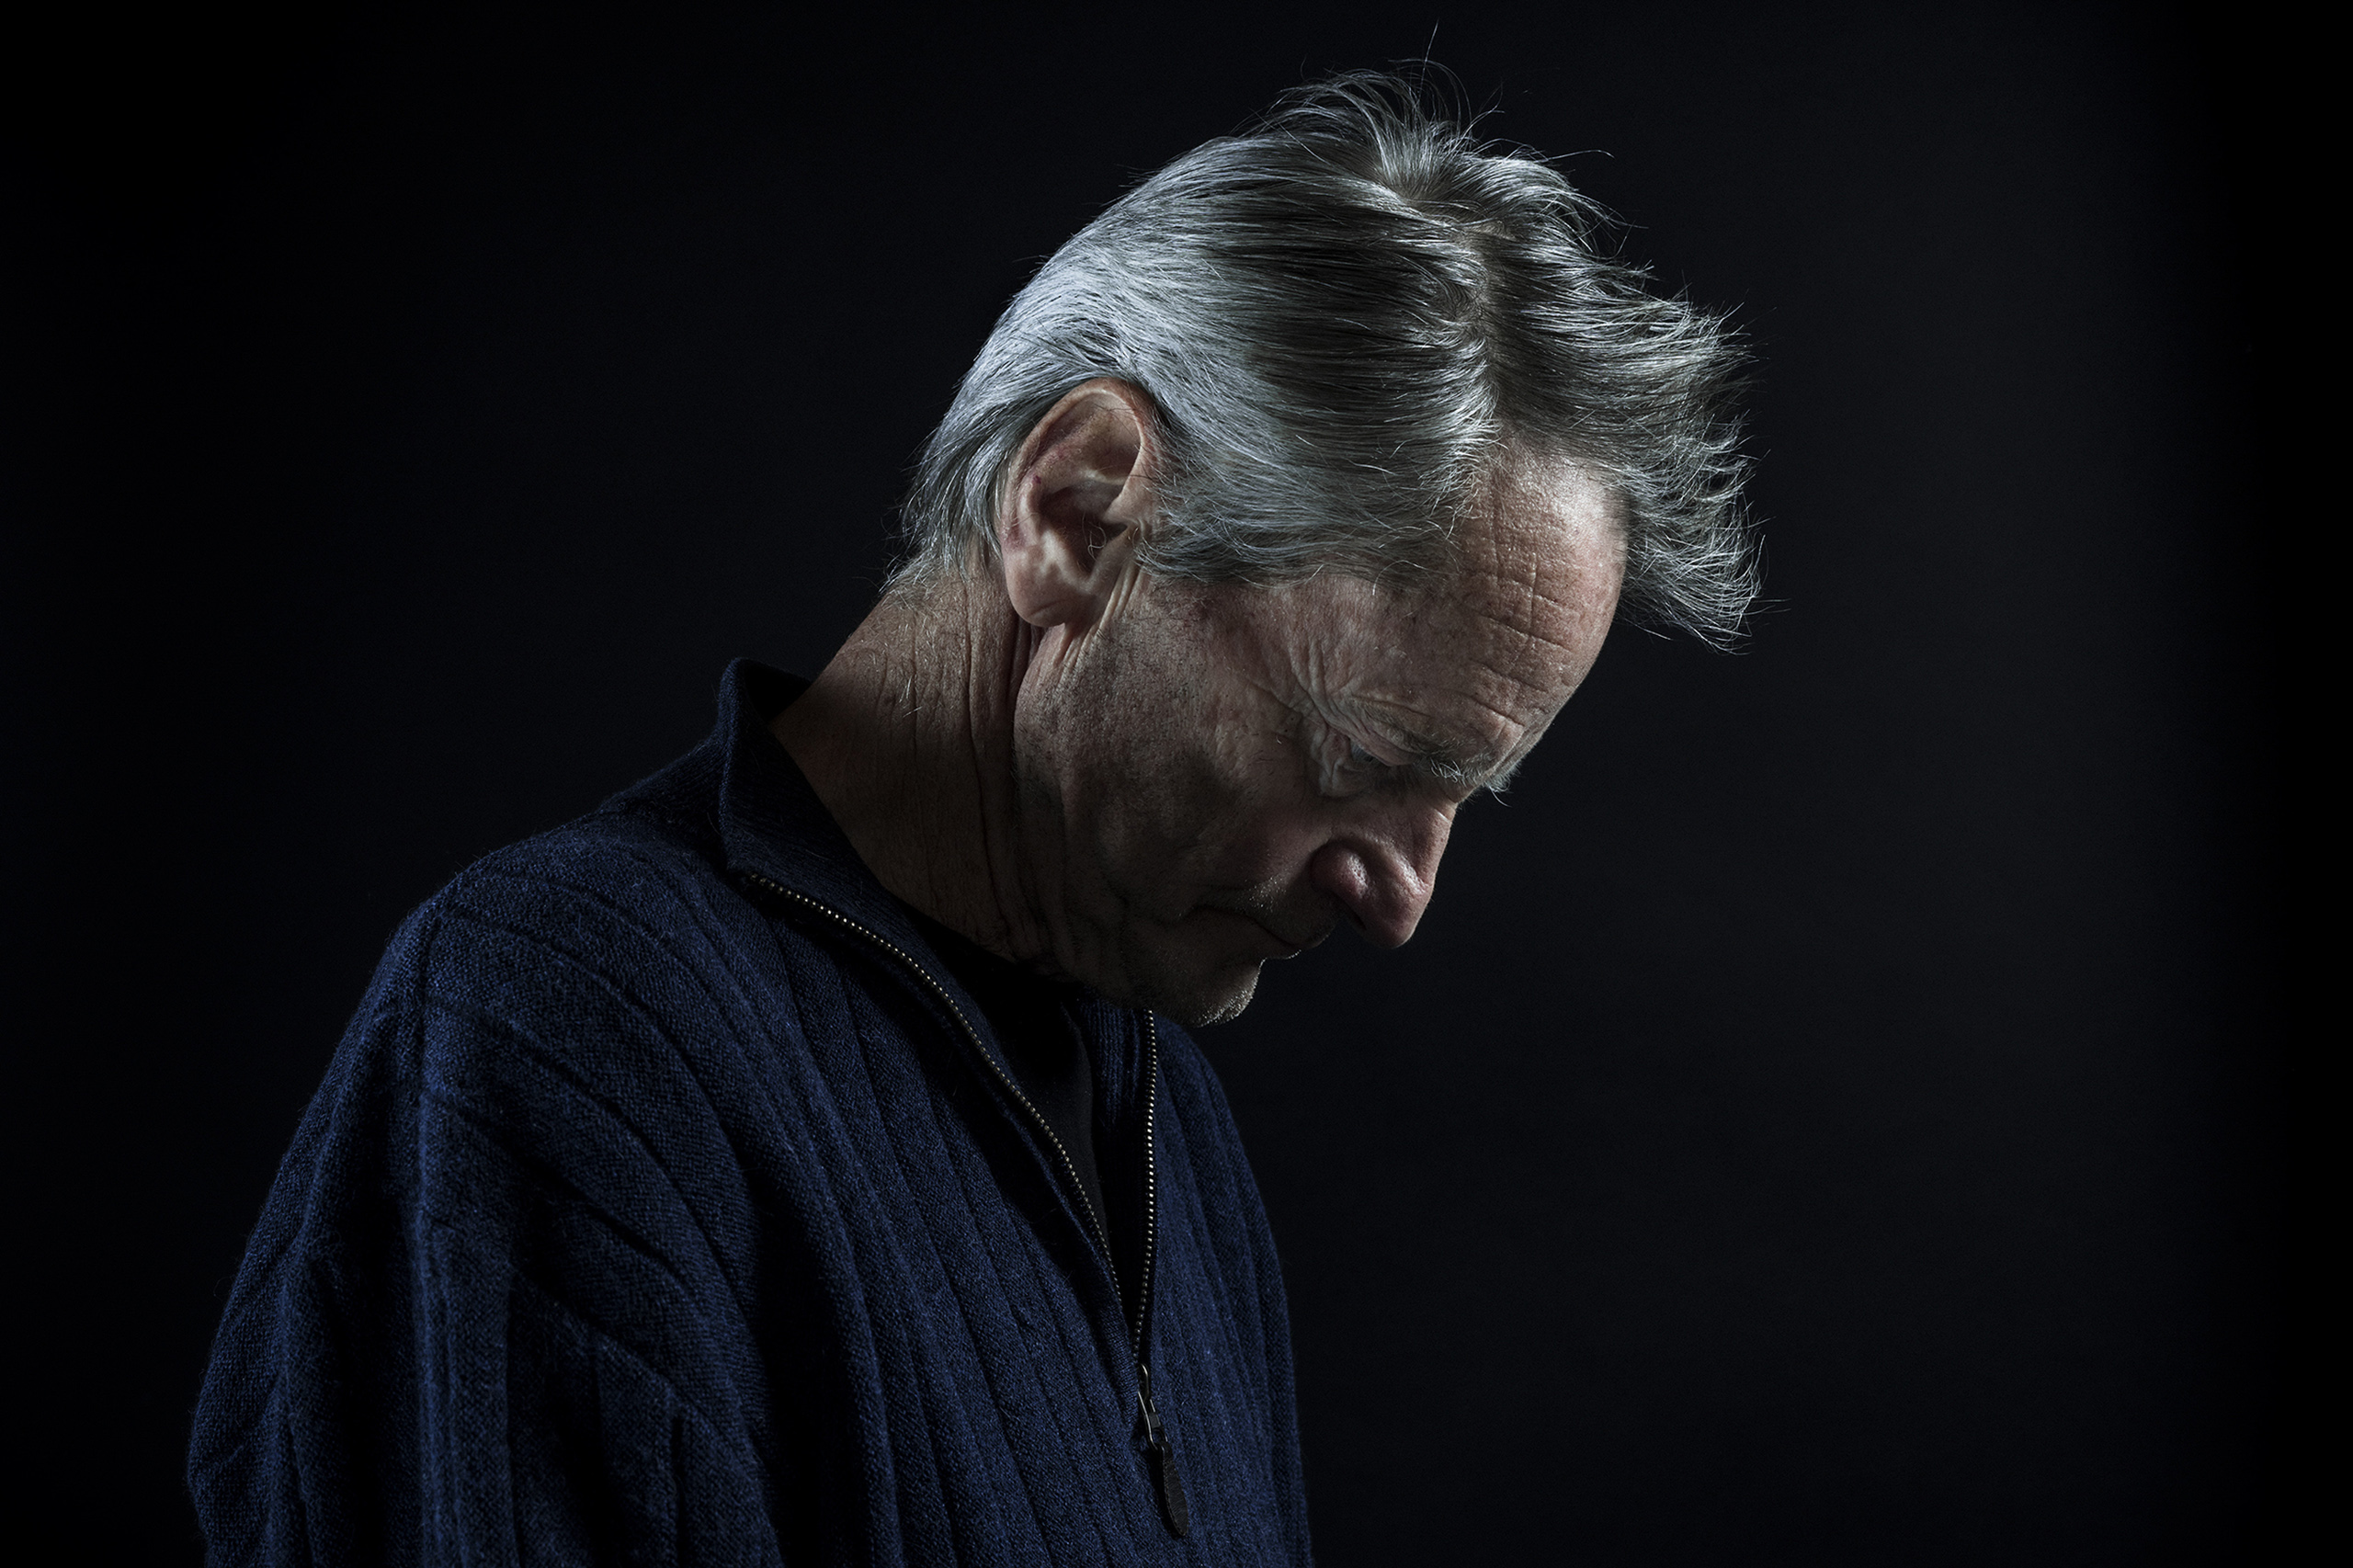 Playwright and actor Sam Shepard on a day of rehearsal for his play "Buried Child," which won the Pulitzer Prize in 1979, at a studio in New York, Jan. 22, 2016. (Chad Batka—The New York Times/Redux)